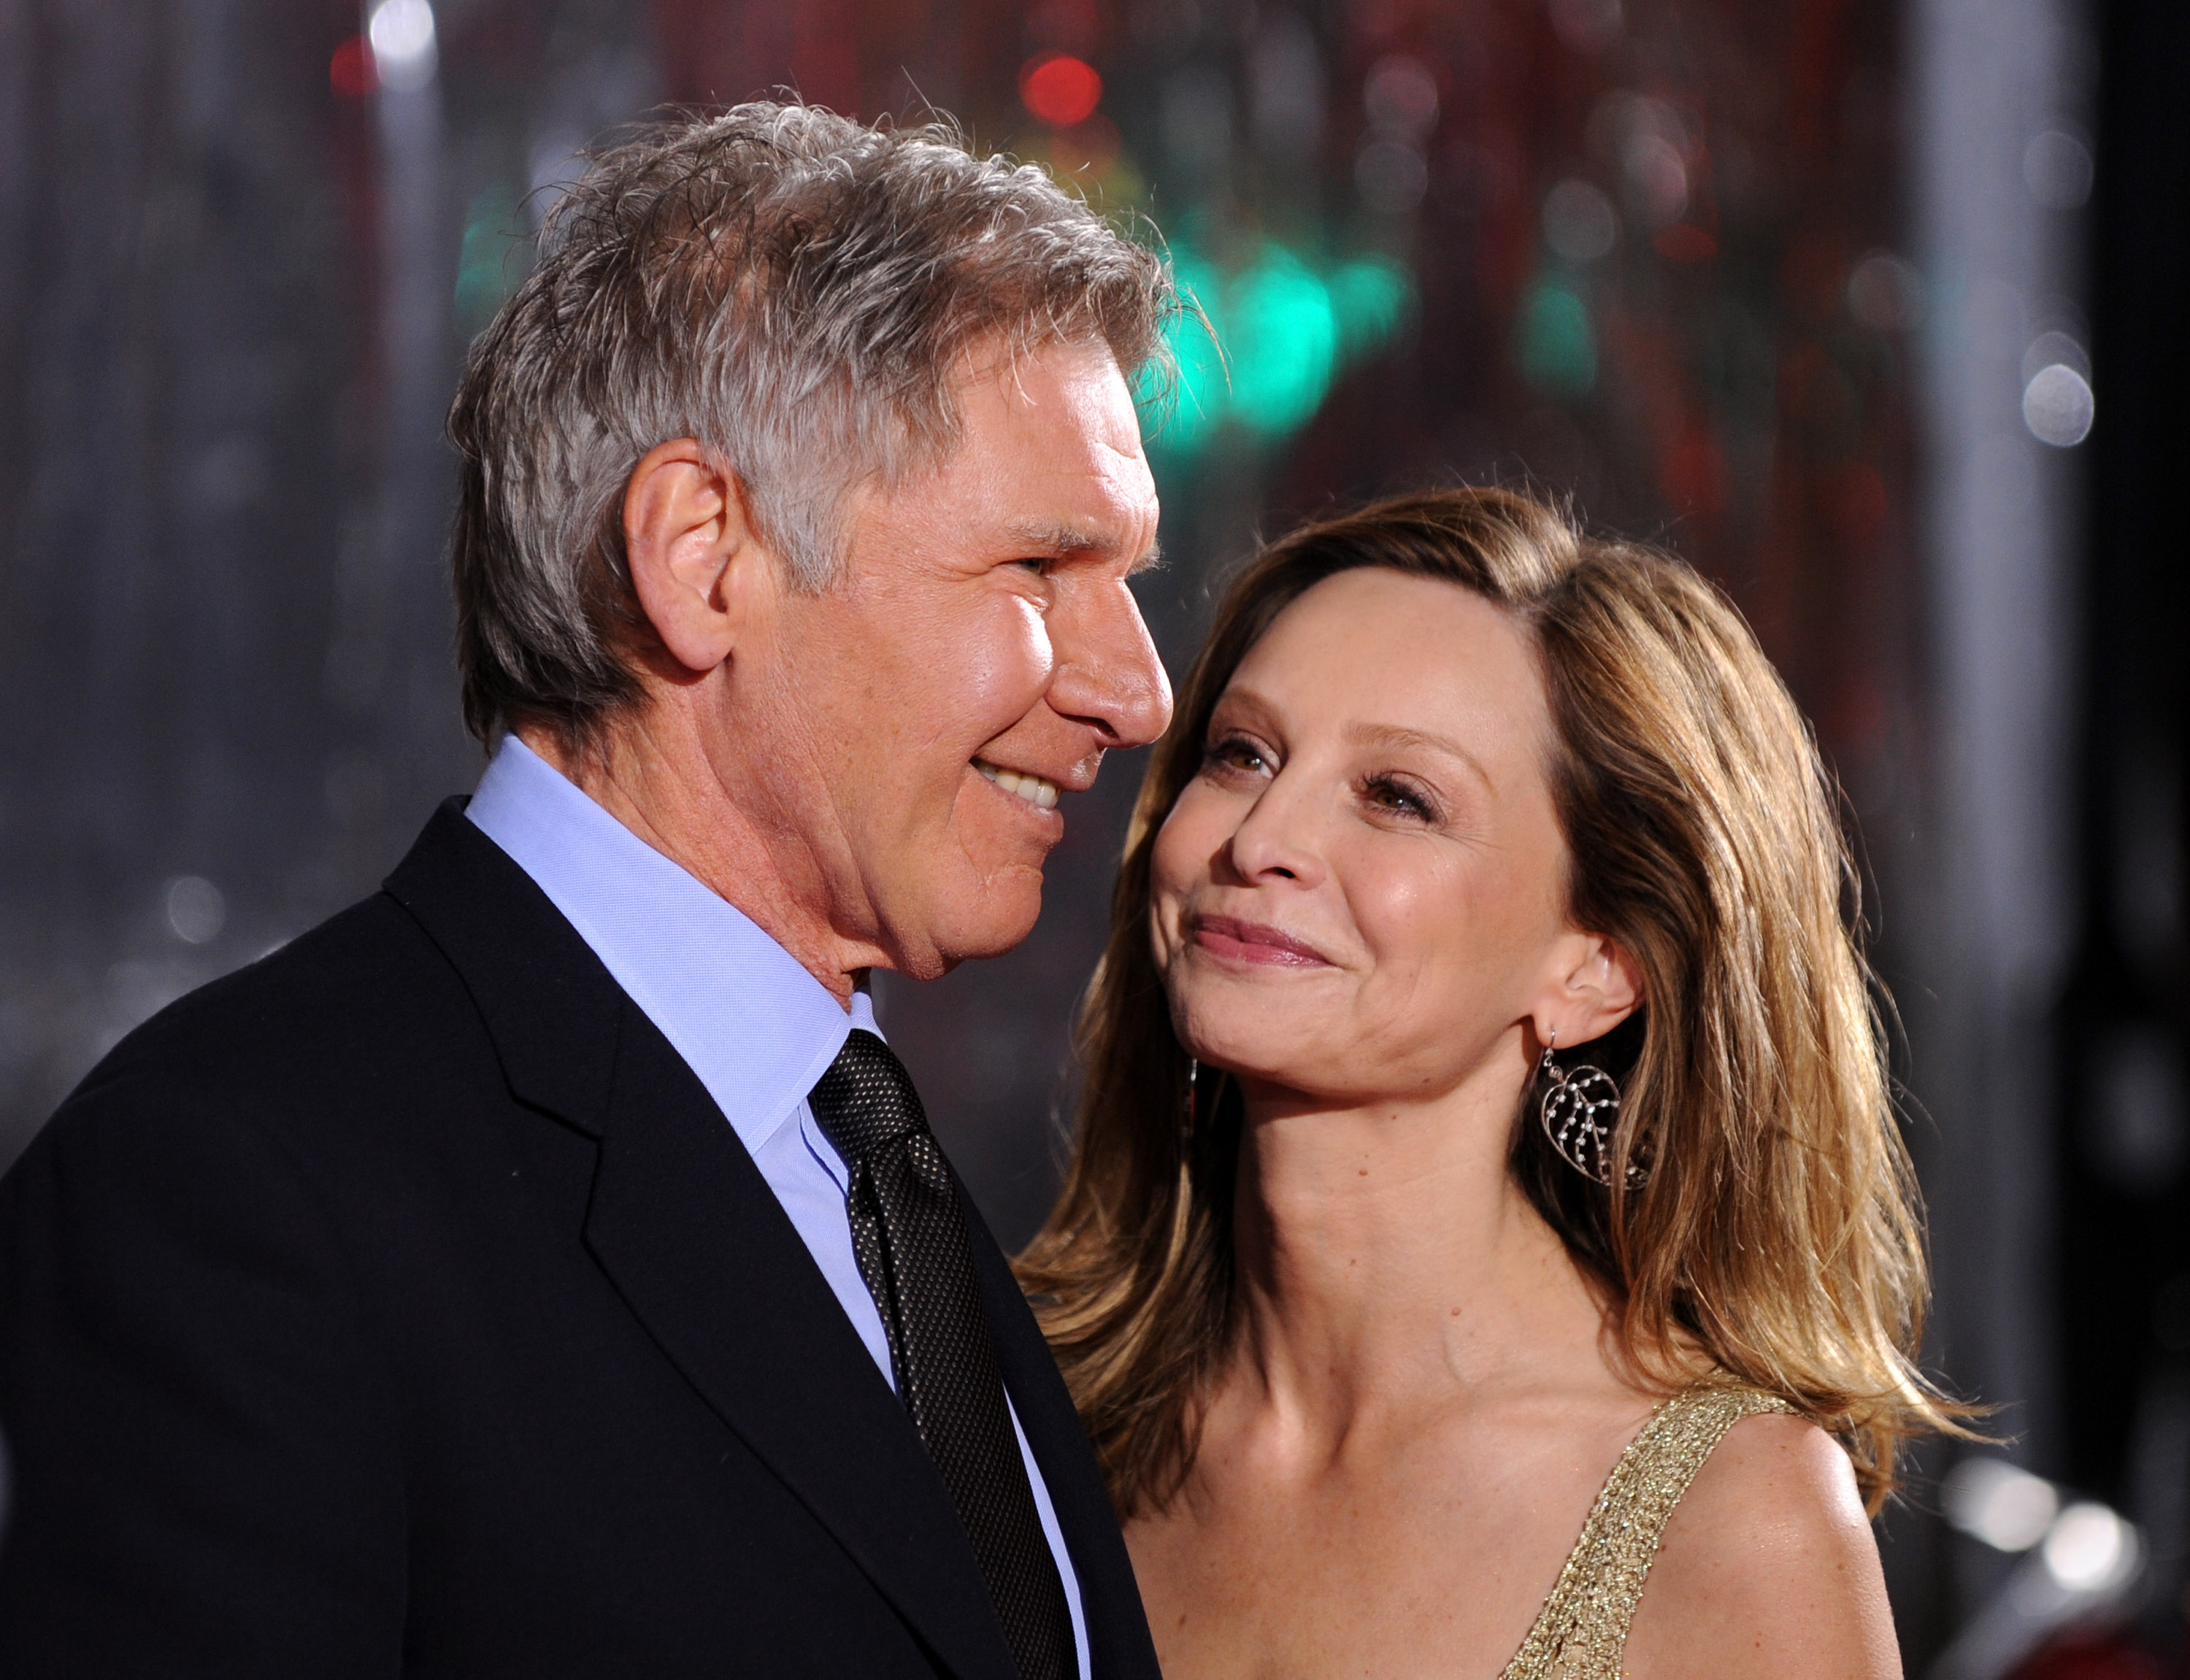 Harrison Ford and Calista Flockhart at the premiere of CBS Films' "Extraordinary Measures" on January 19, 2010 in Hollywood, California | Source: Getty Images